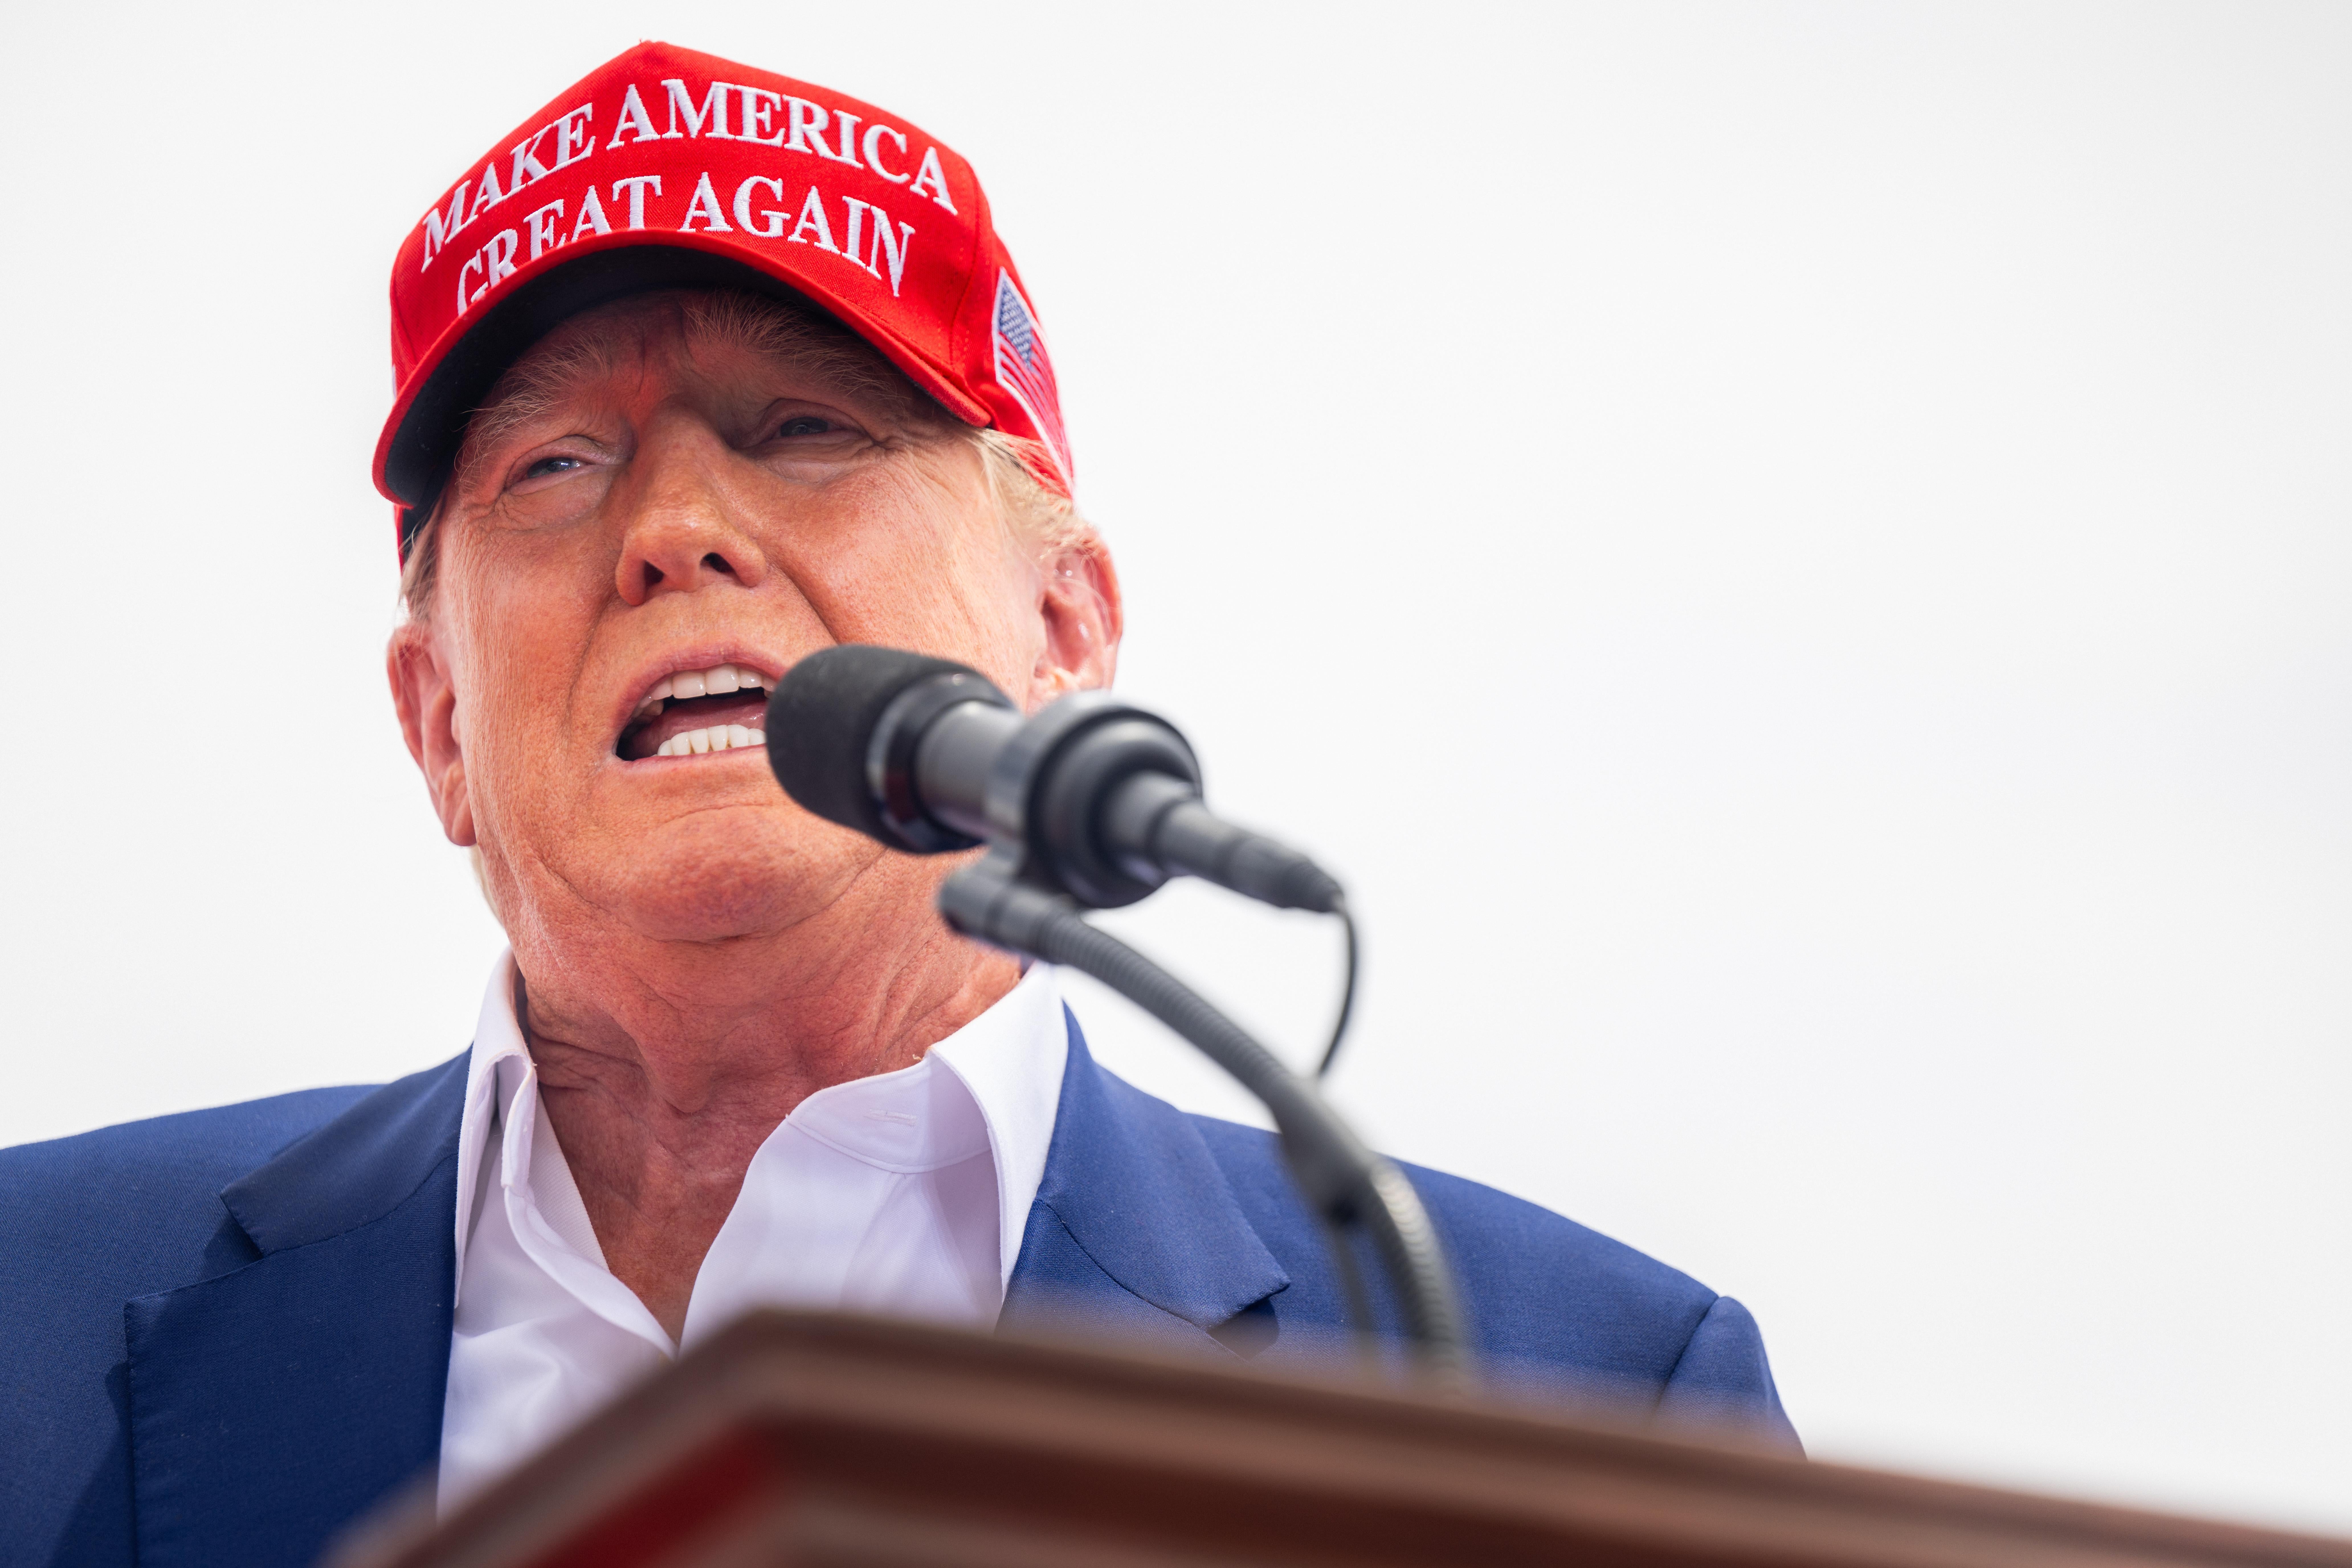 Former U.S. President Donald Trump wears a MAGA hat and speaks during a campaign rally.